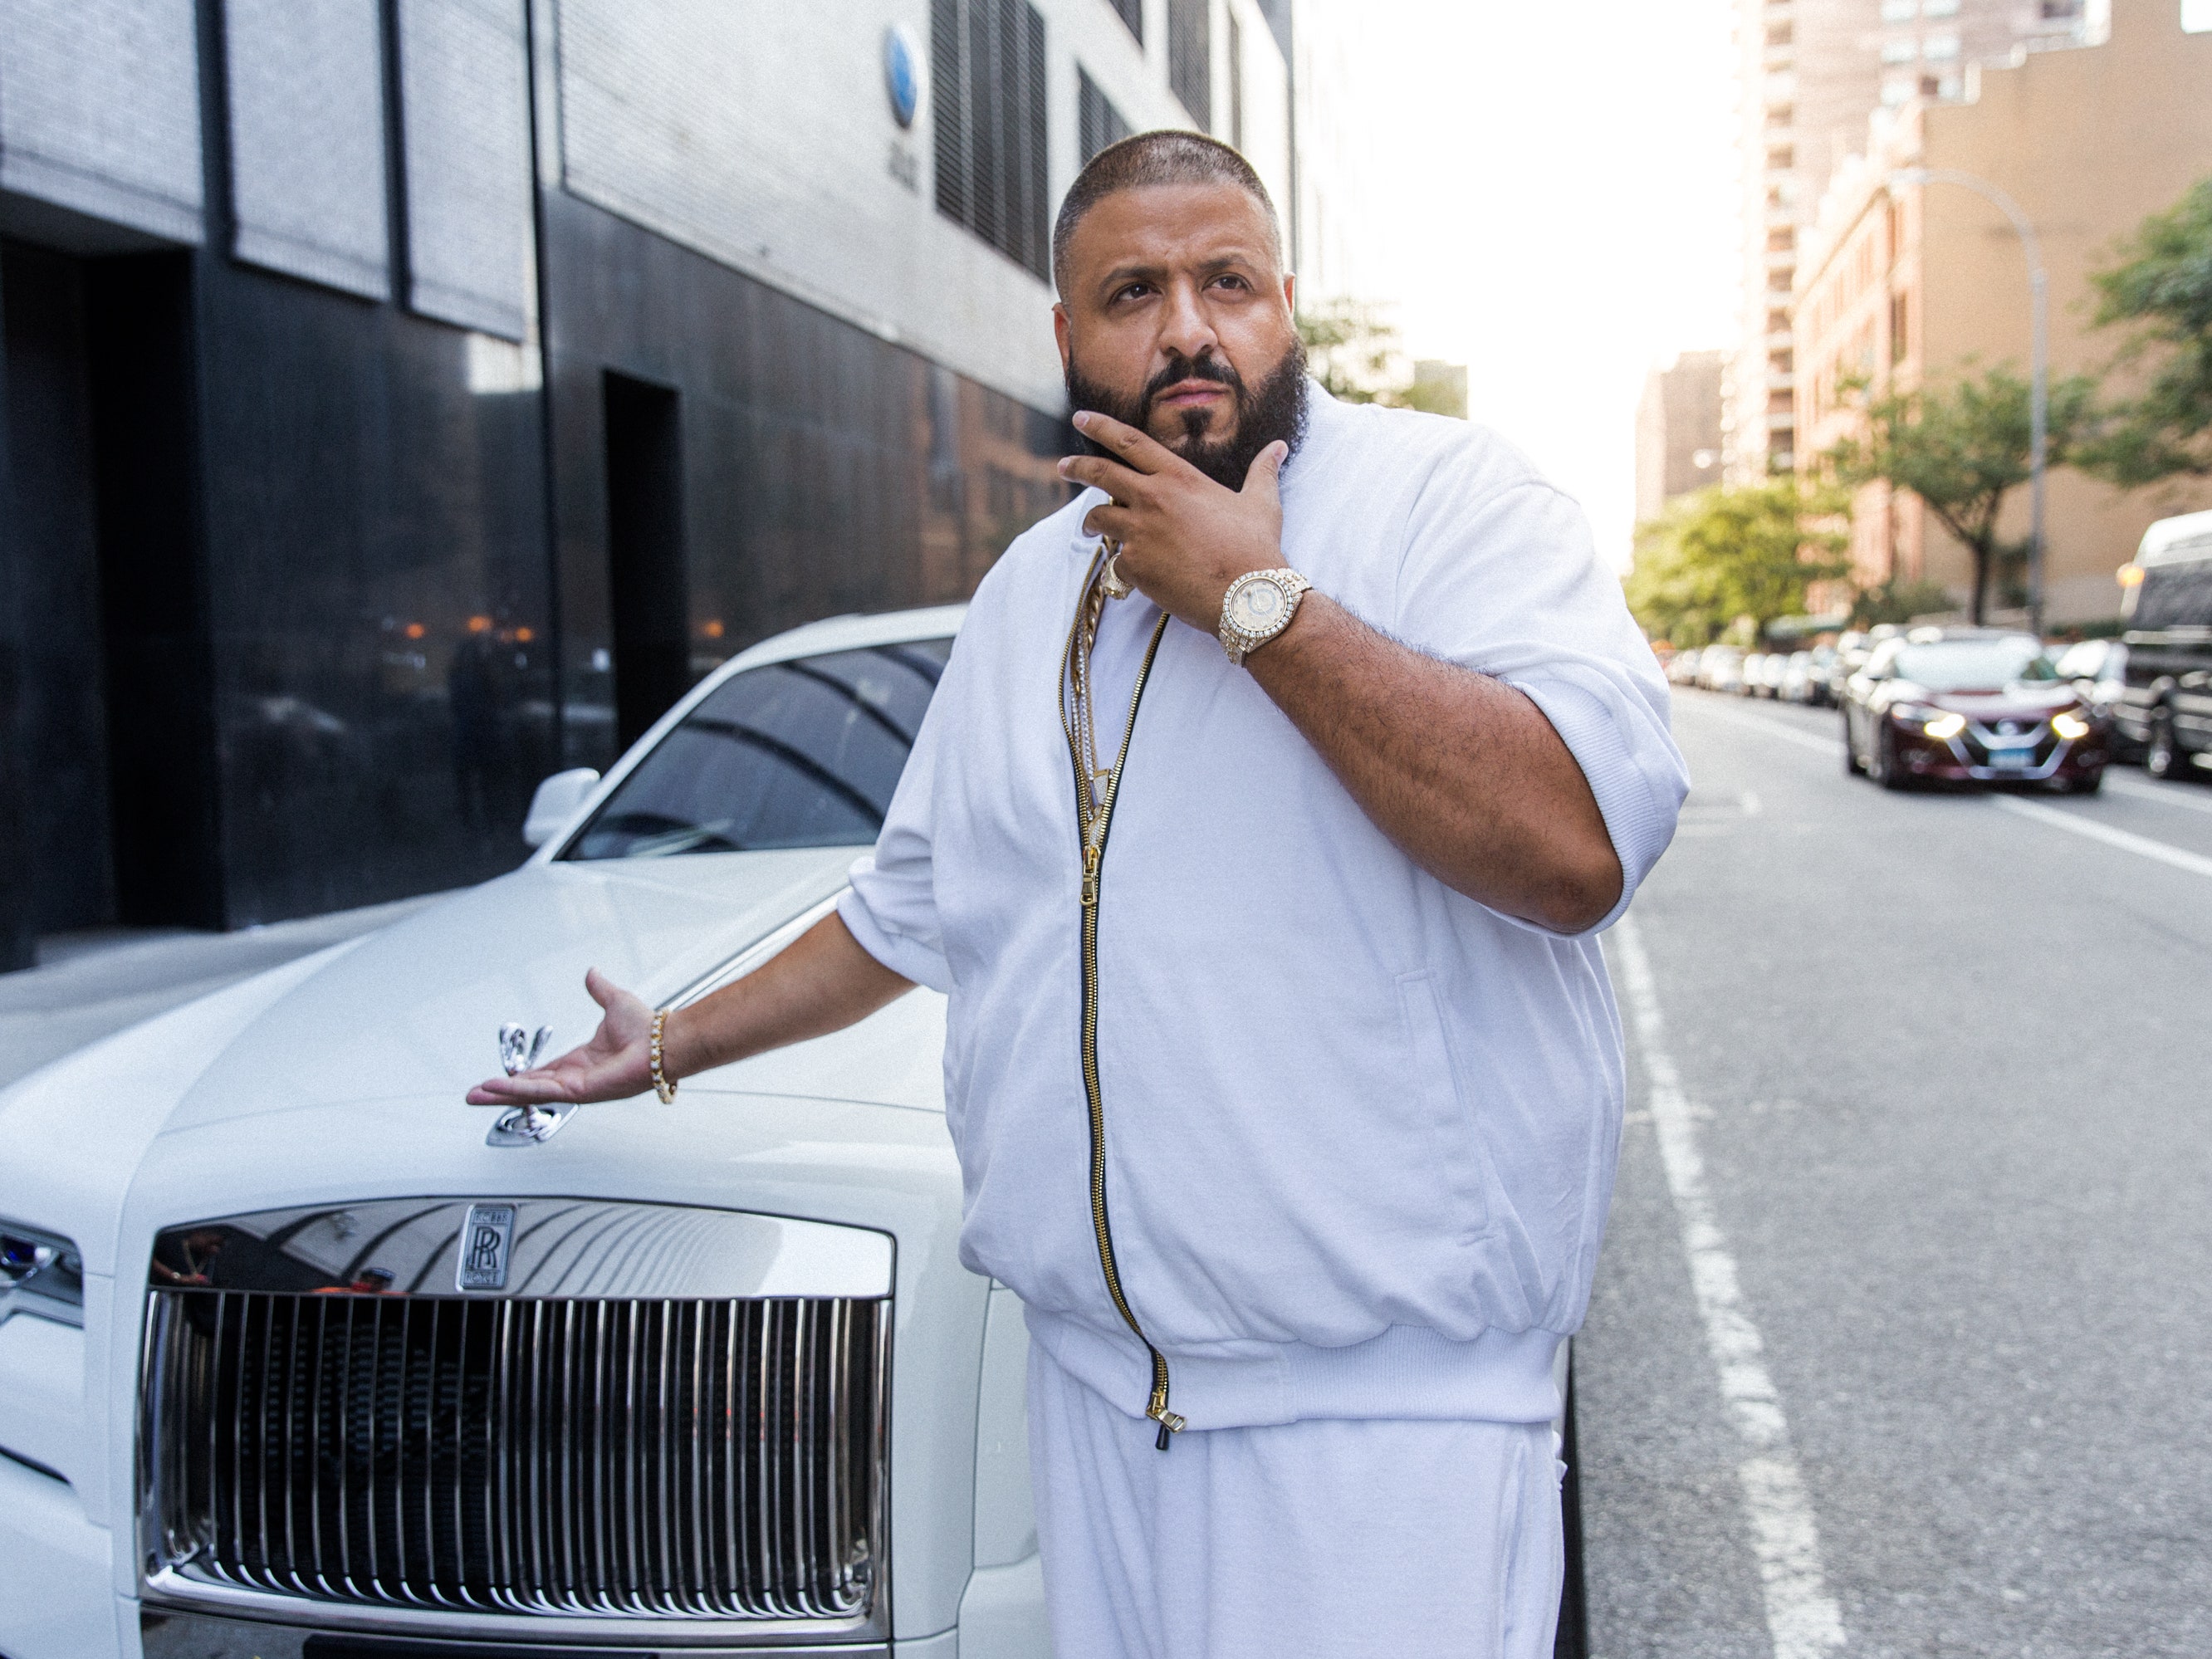 I think it would be hilarious if GTA 6 had a OG Loc type of character inspired by DJ Khaled, that dude is a parody of himself : r/GTA6